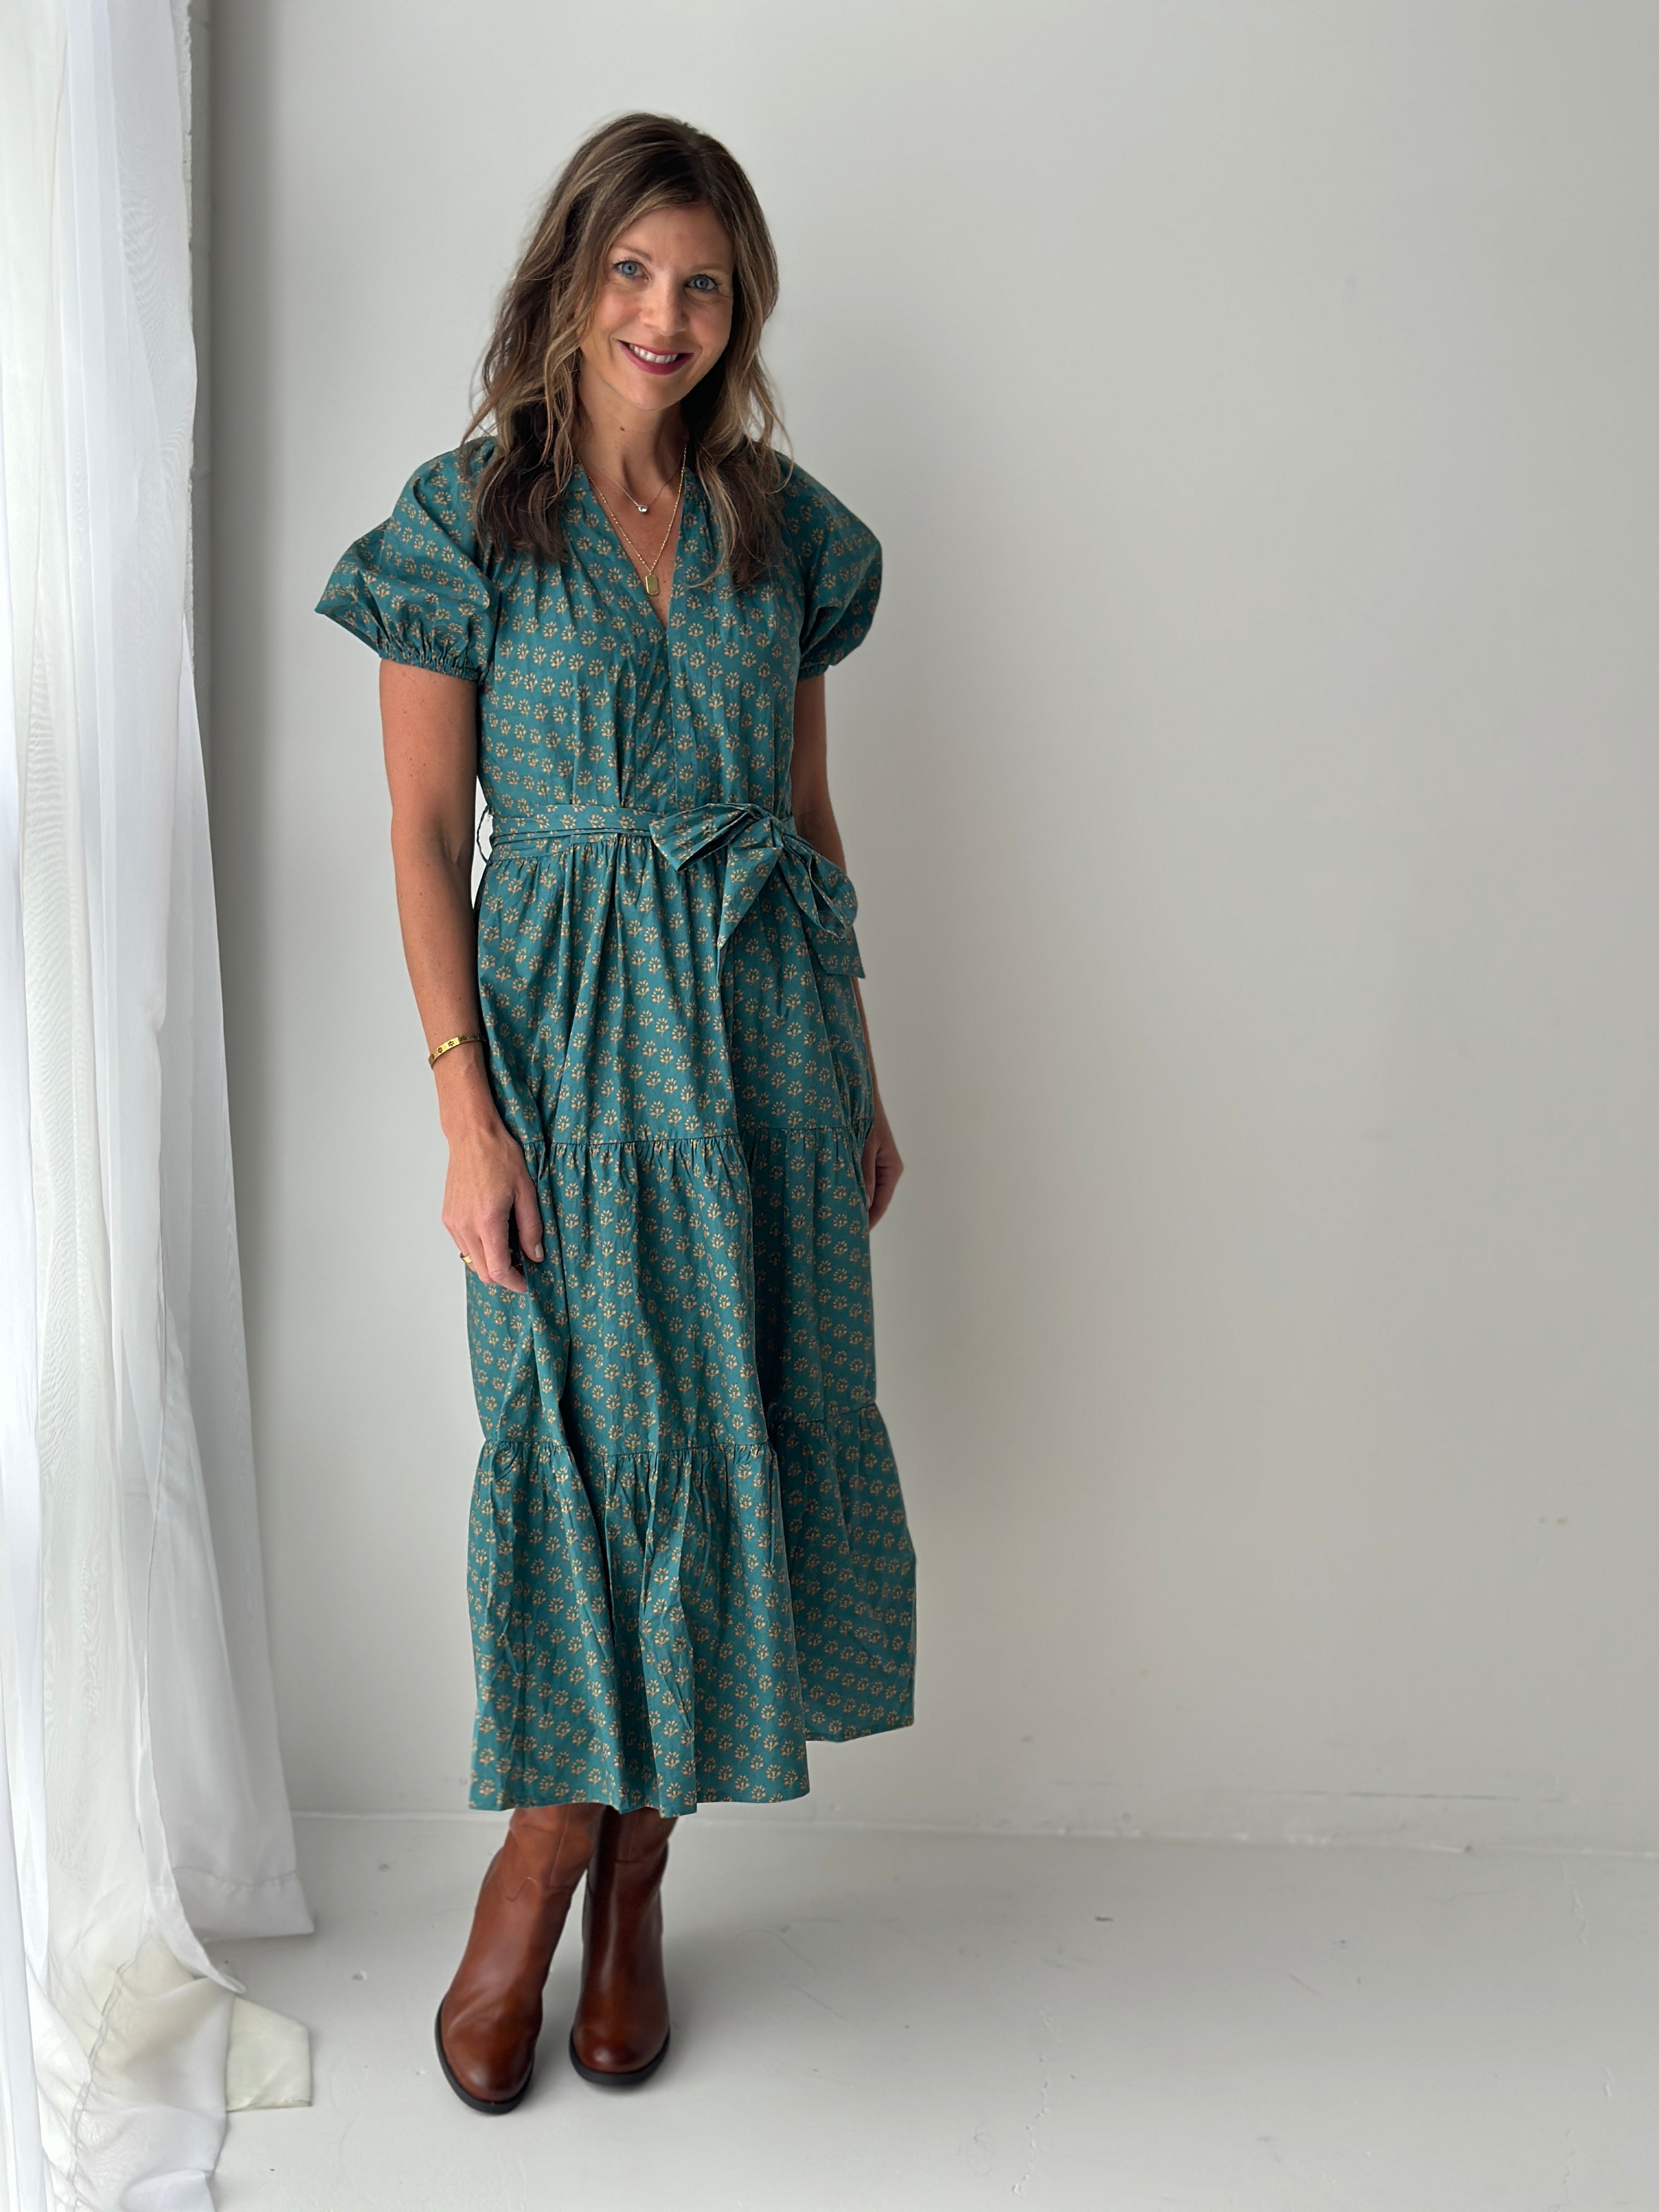 Tie Front Midi Dress in Ditsy Teal-151 Dresses - Short-Little Bird Boutique